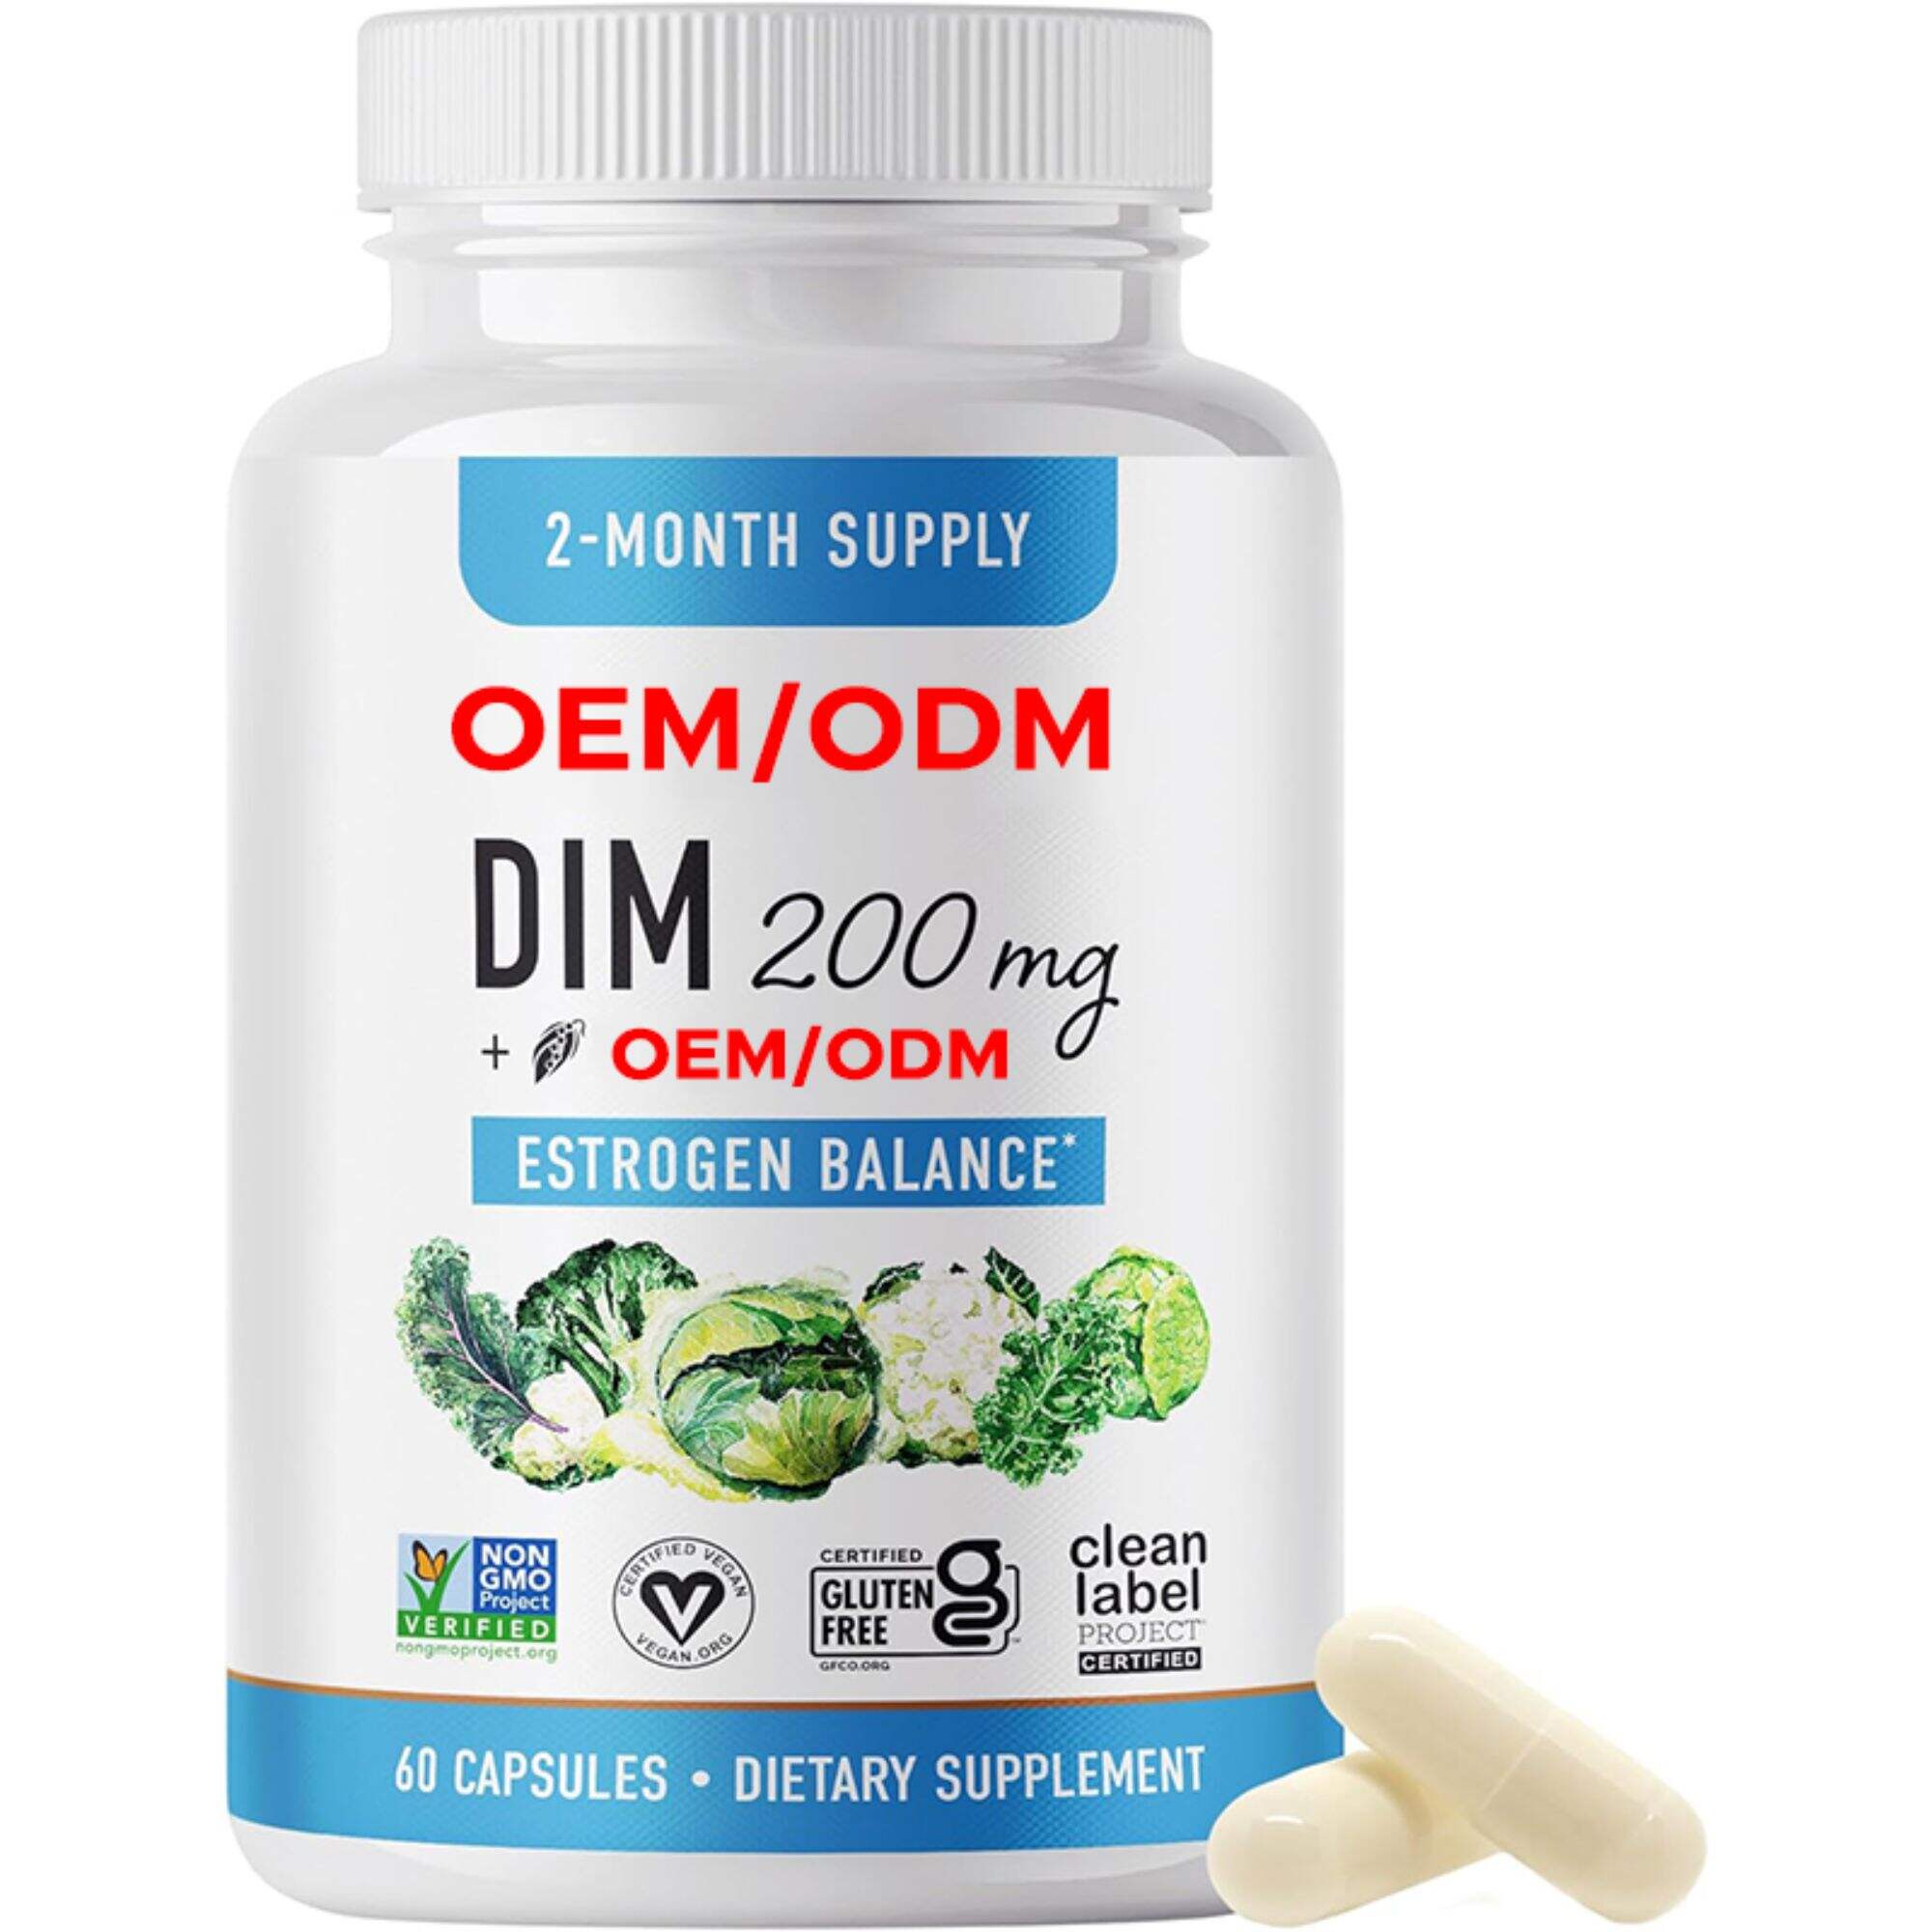 Estrogen Hormone Balance DIM Supplement 200 mg for Women Men Hormonal Acne Supplements, Menopause Support, Antioxidant Support Clean Label Project Certified, Vegan, Soy Free 60 Ct.